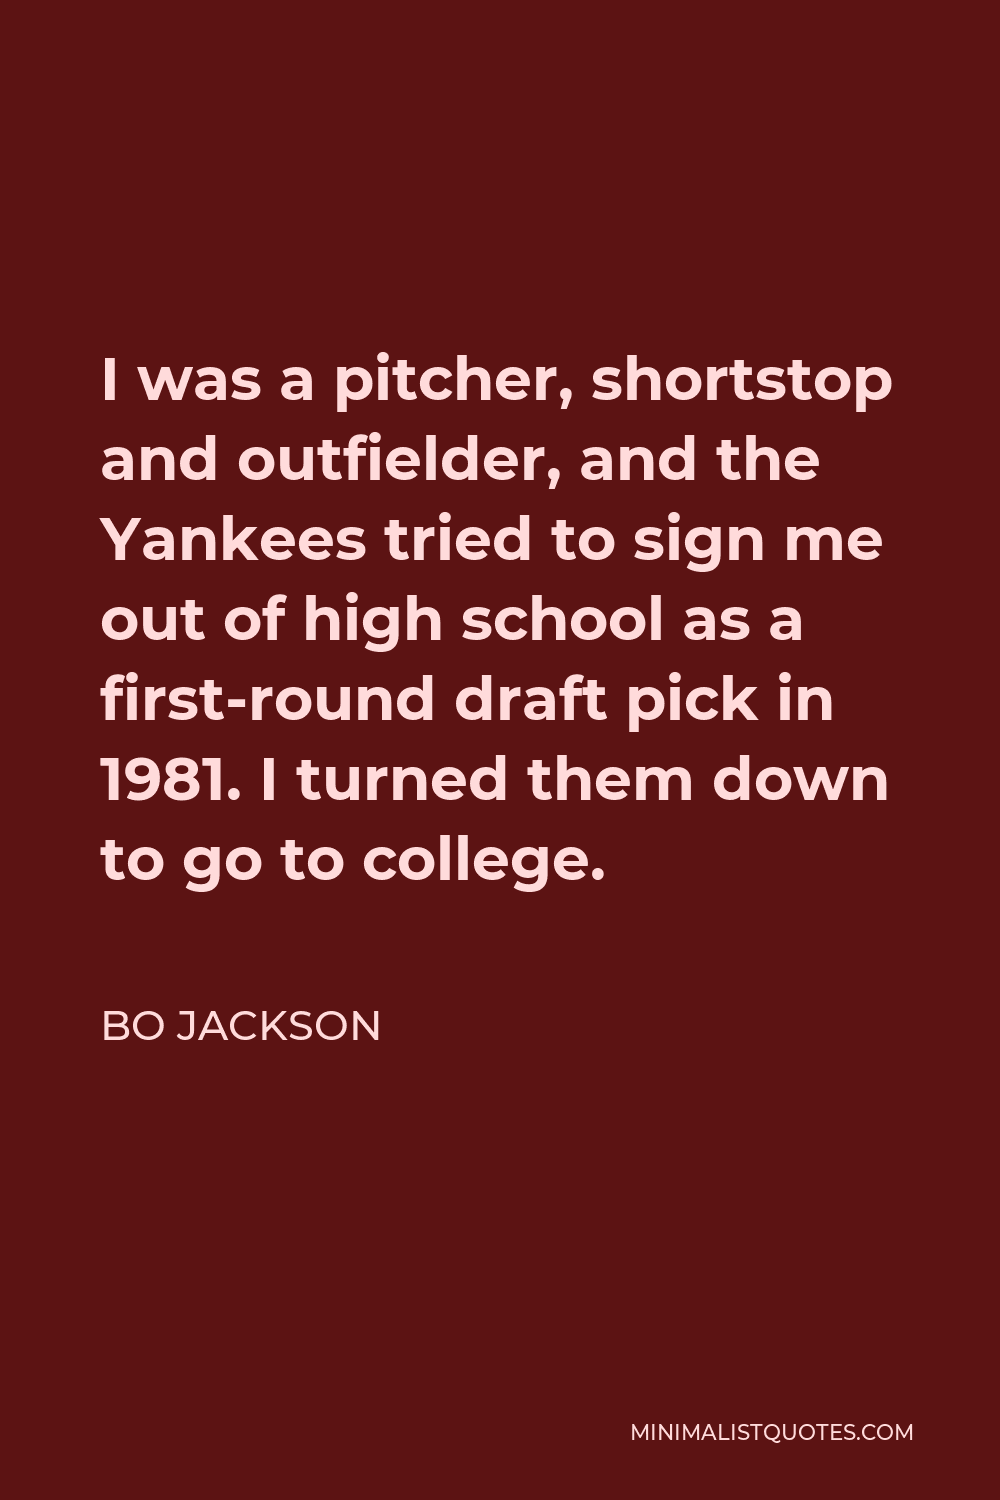 Bo Jackson Quote - I was a pitcher, shortstop and outfielder, and the Yankees tried to sign me out of high school as a first-round draft pick in 1981. I turned them down to go to college.